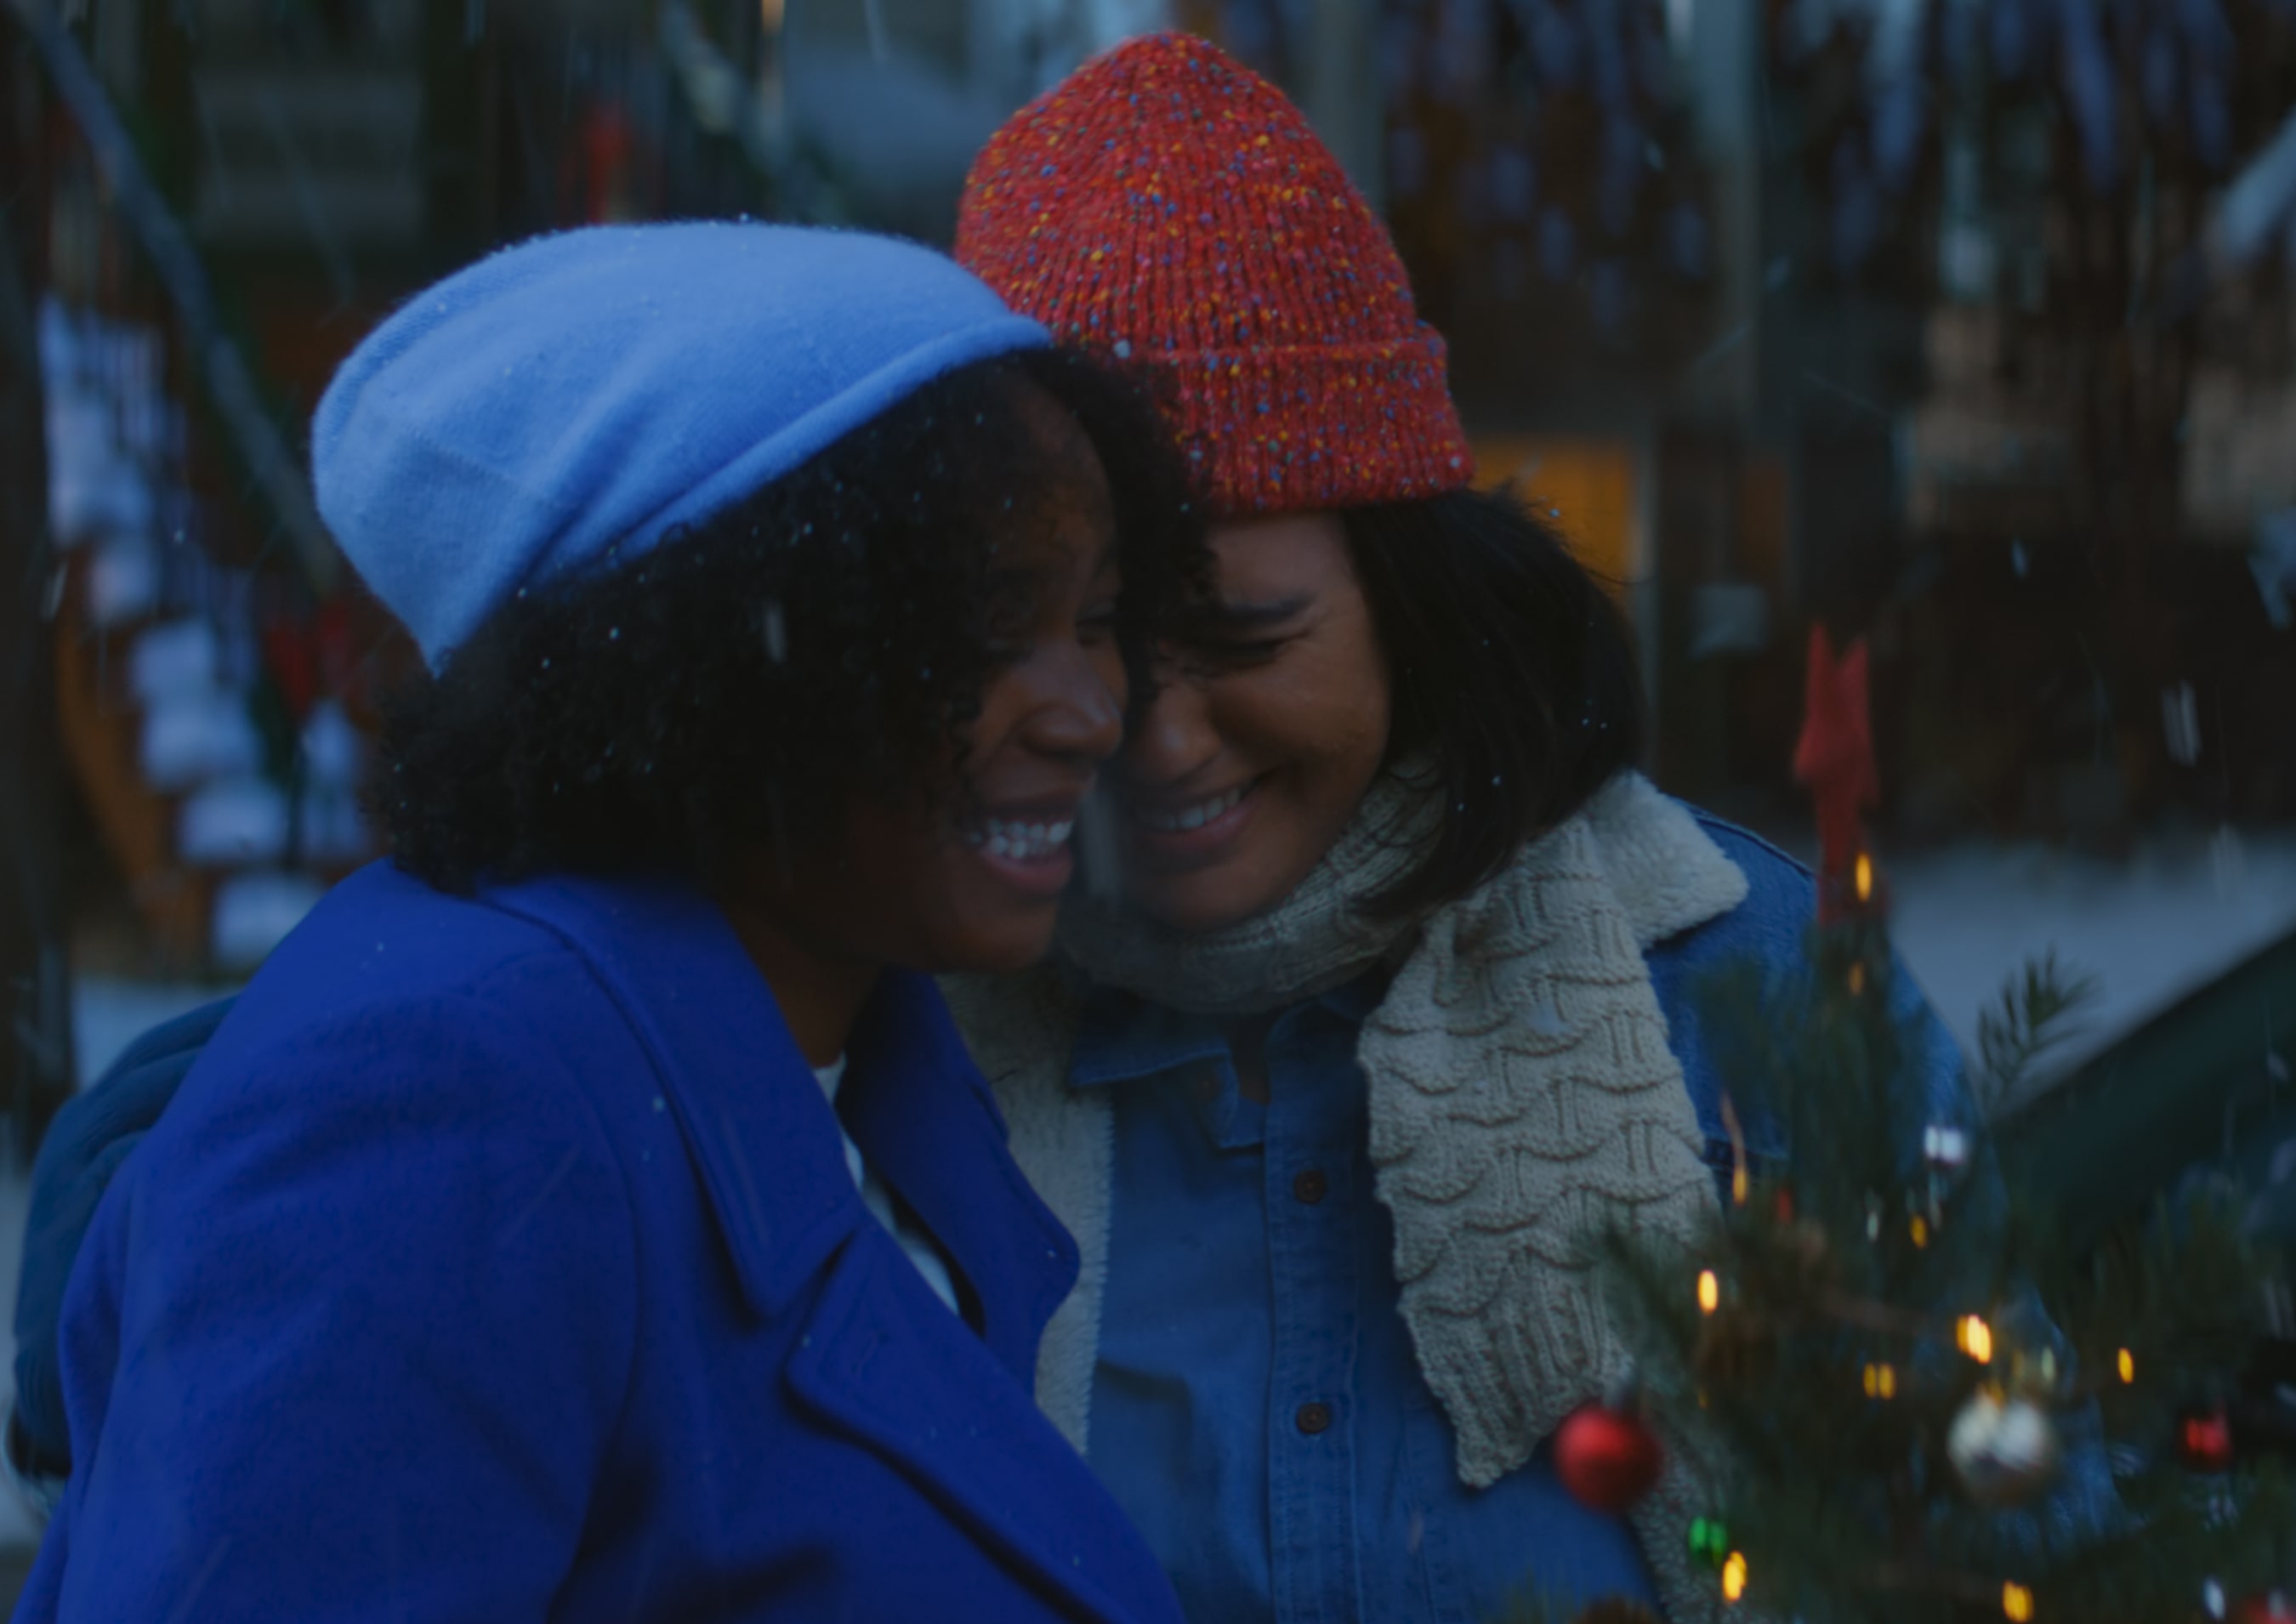 Toyota’s new spot “Like No One’s Watching” aims to encourage people to spread kindness this holiday season and beyond.